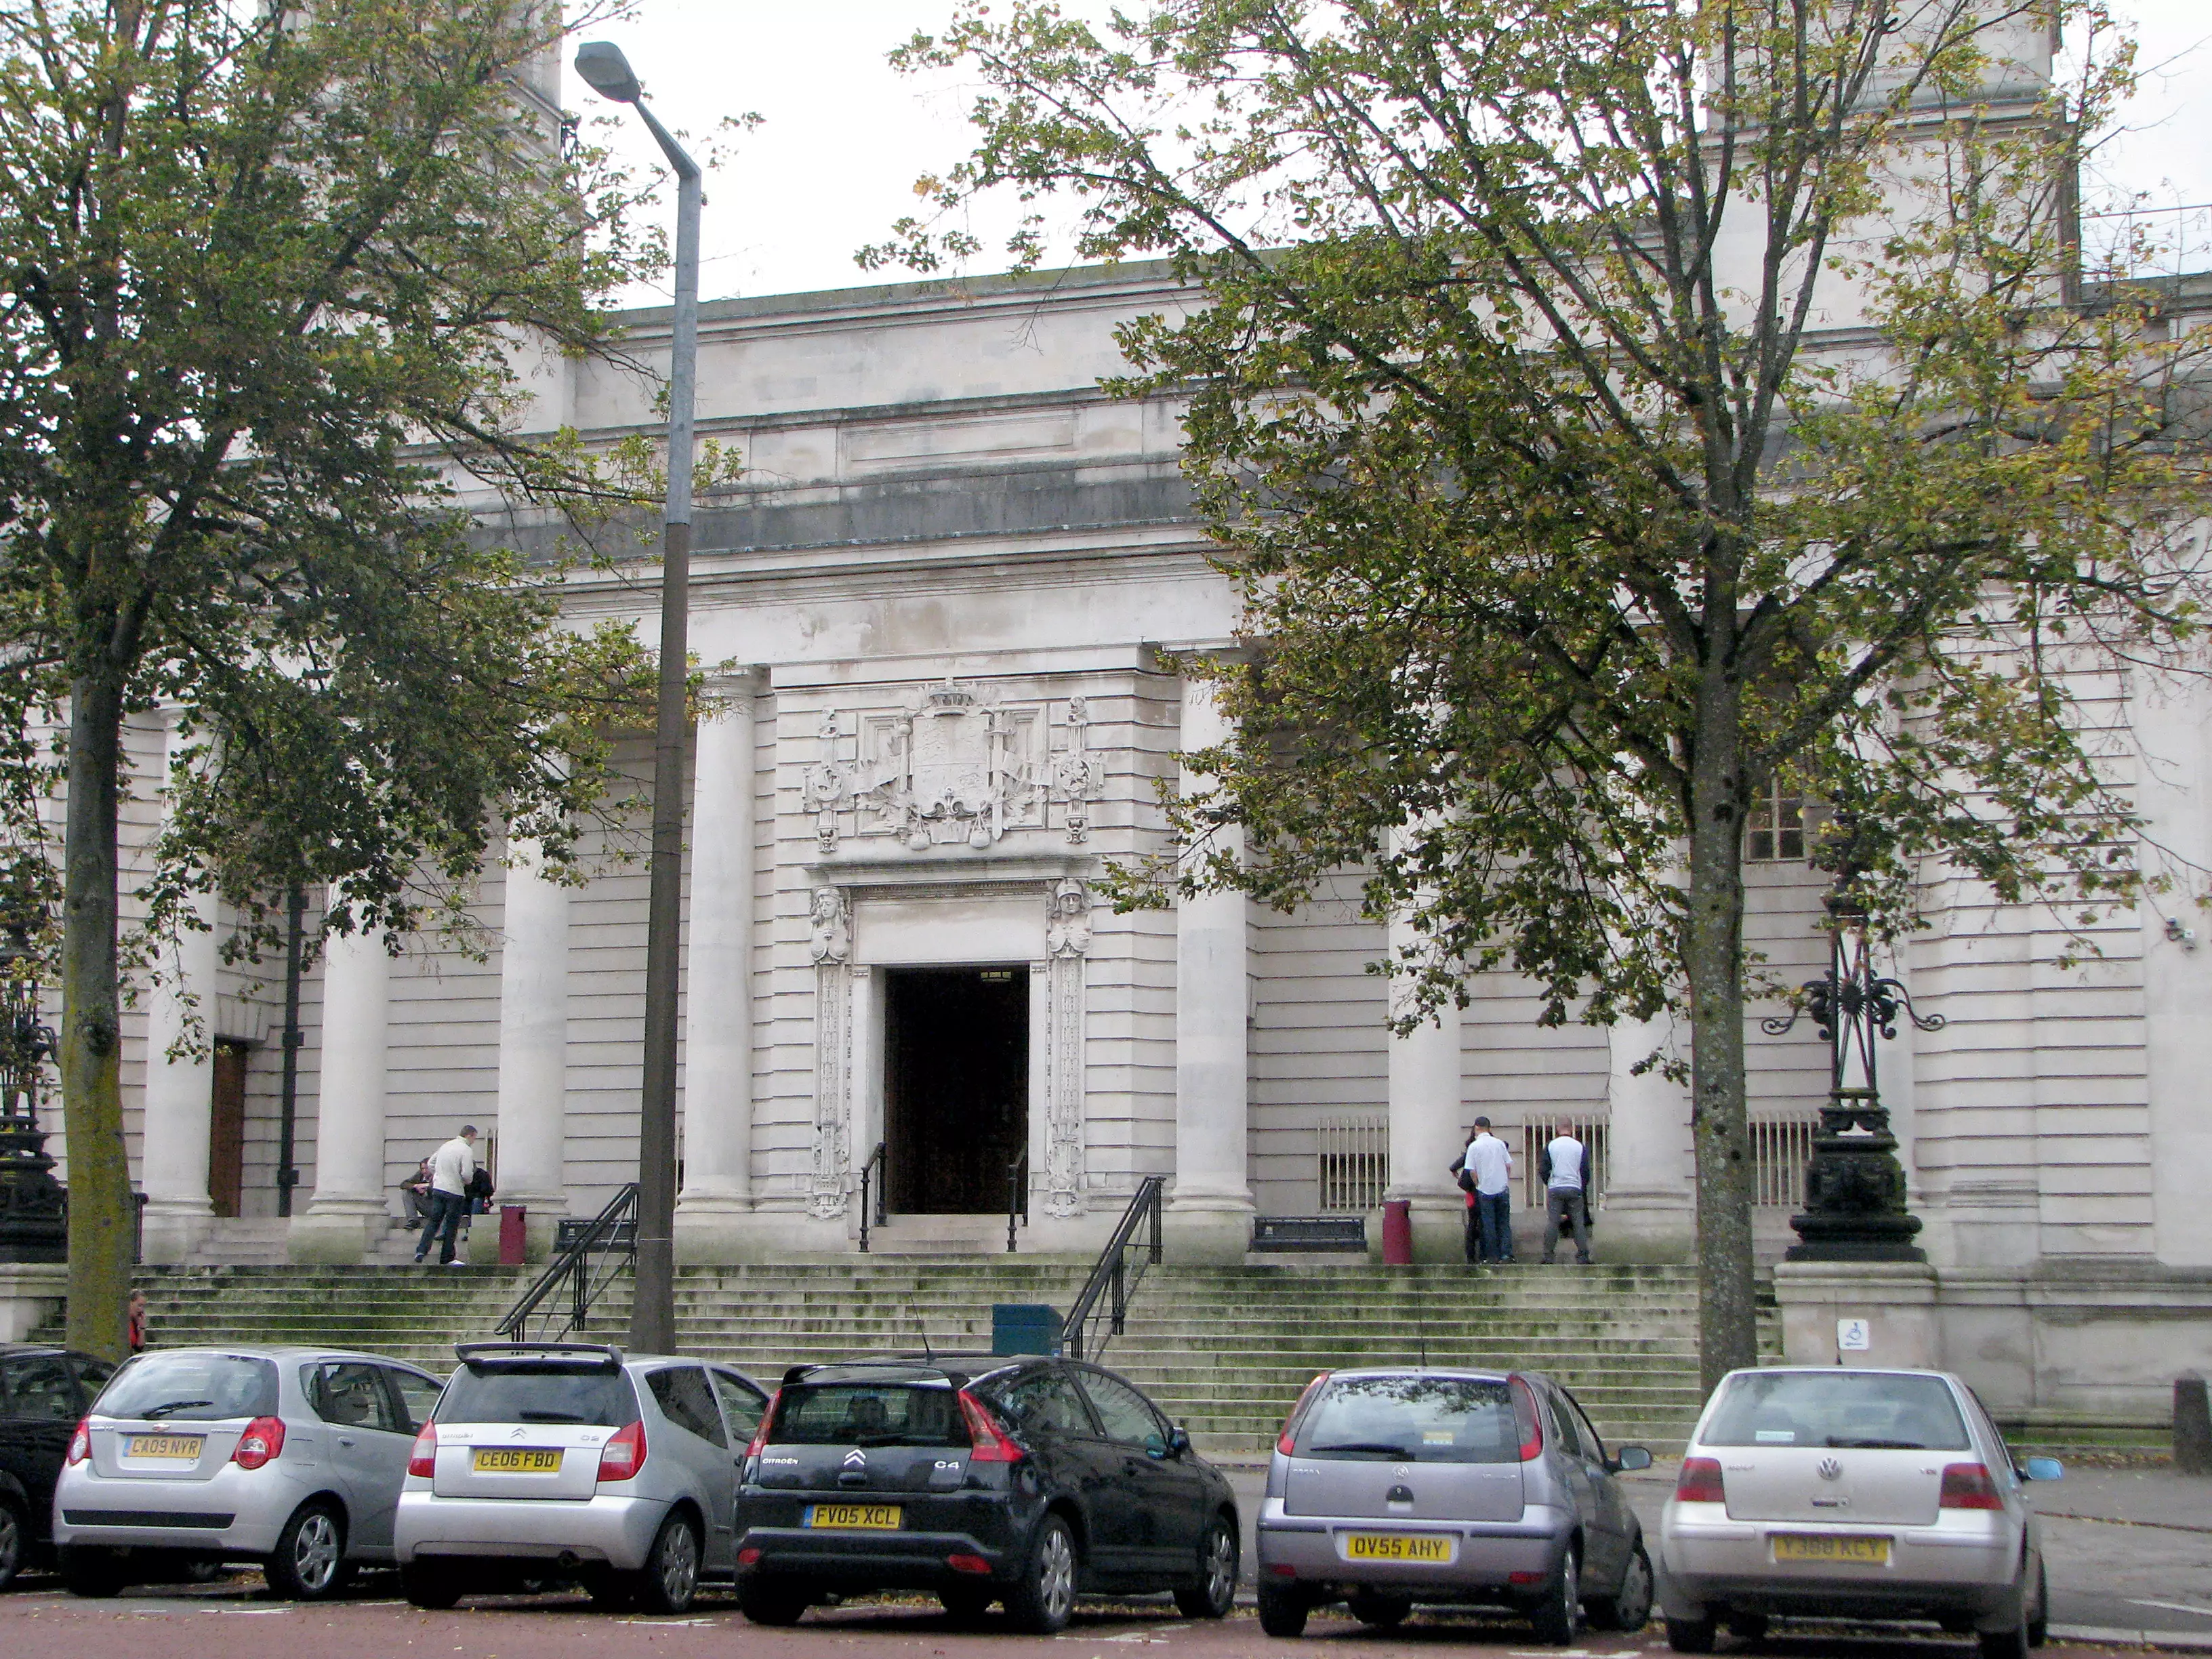 Cardiff Crown Court.